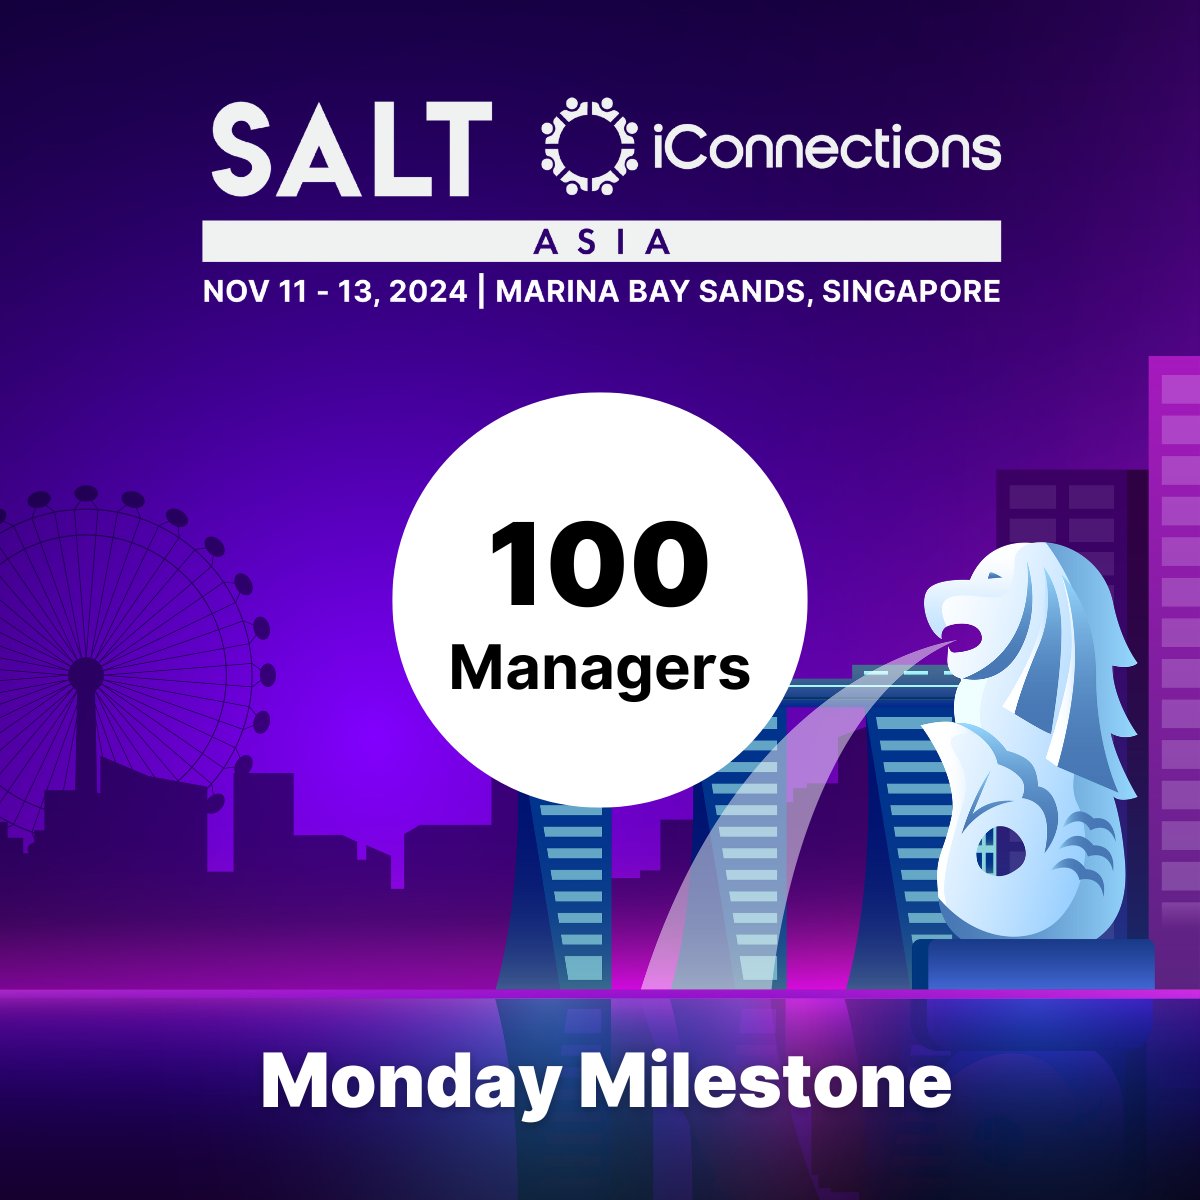 🎉 Monday Milestone | SALT iConnections Asia 2024: 100 Managers Confirmed! We are excited to announce that over 100 managers from across the industry have already registered for SALT iConnections Asia 2024. 🌎 🇸🇬 Learn More - iconnections.io/salt-iconnecti… #SALTiConnectionsNY2024